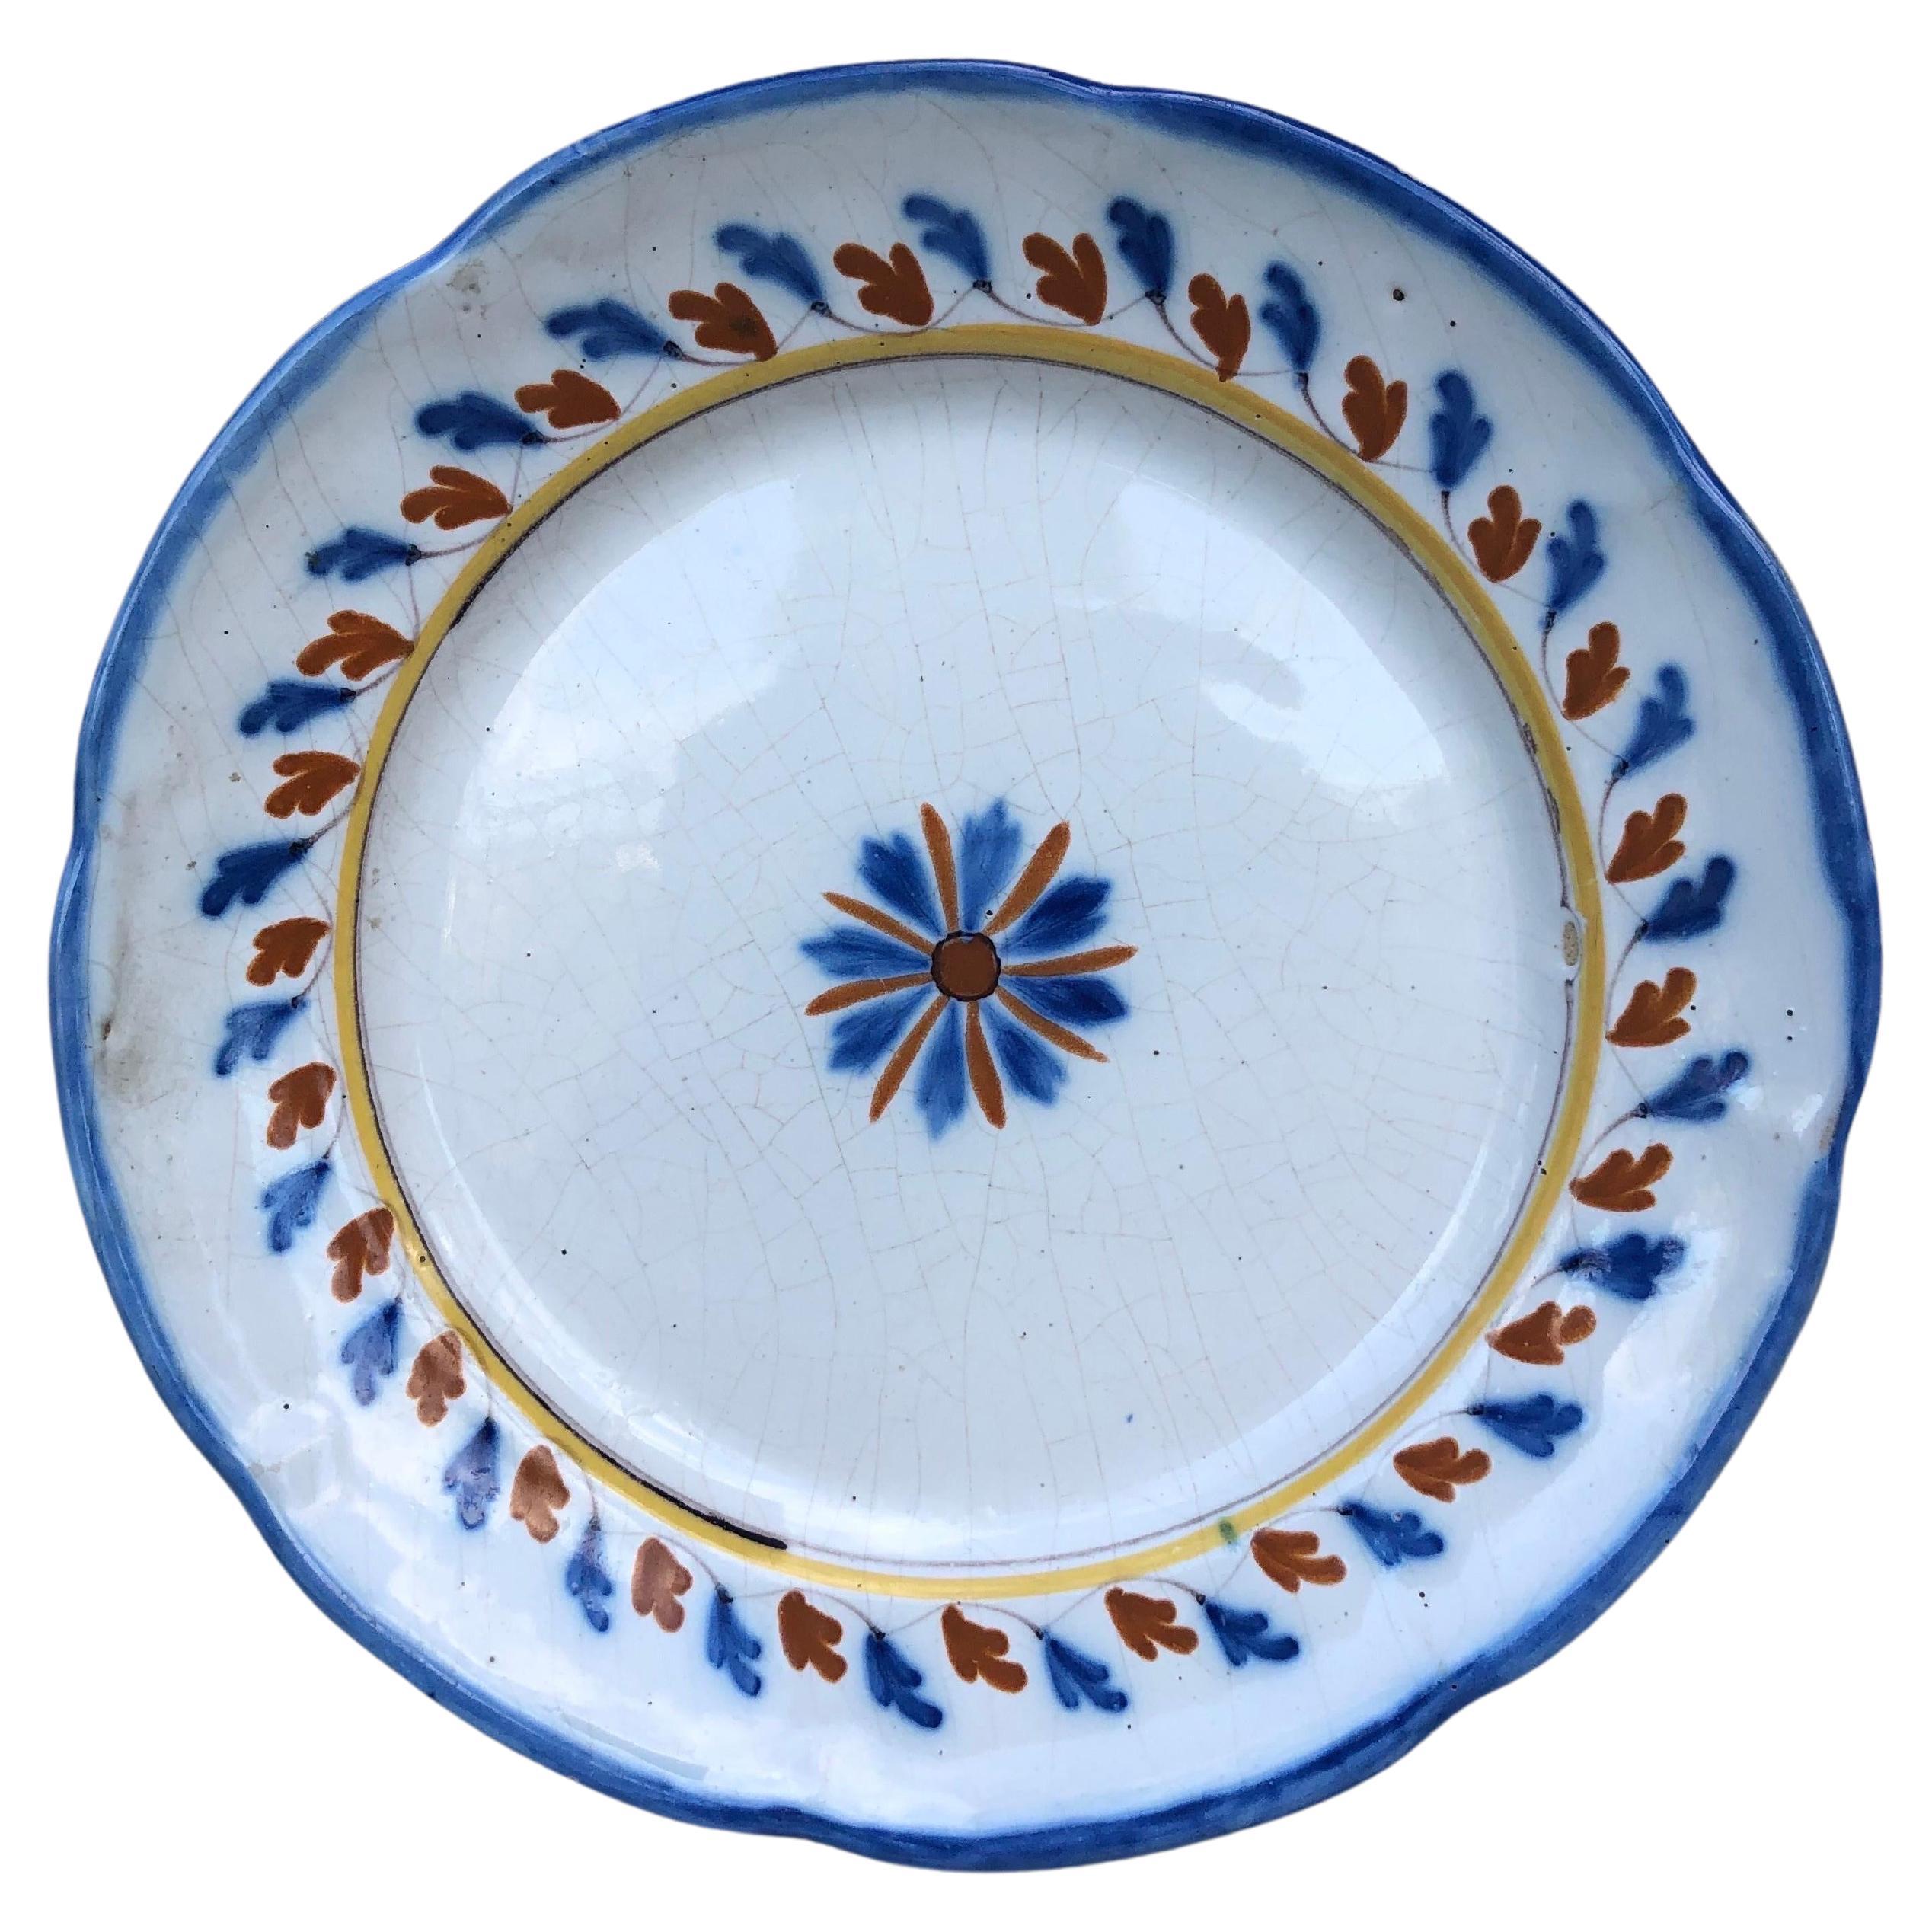 French Rustic Faience Plate Circa 1890